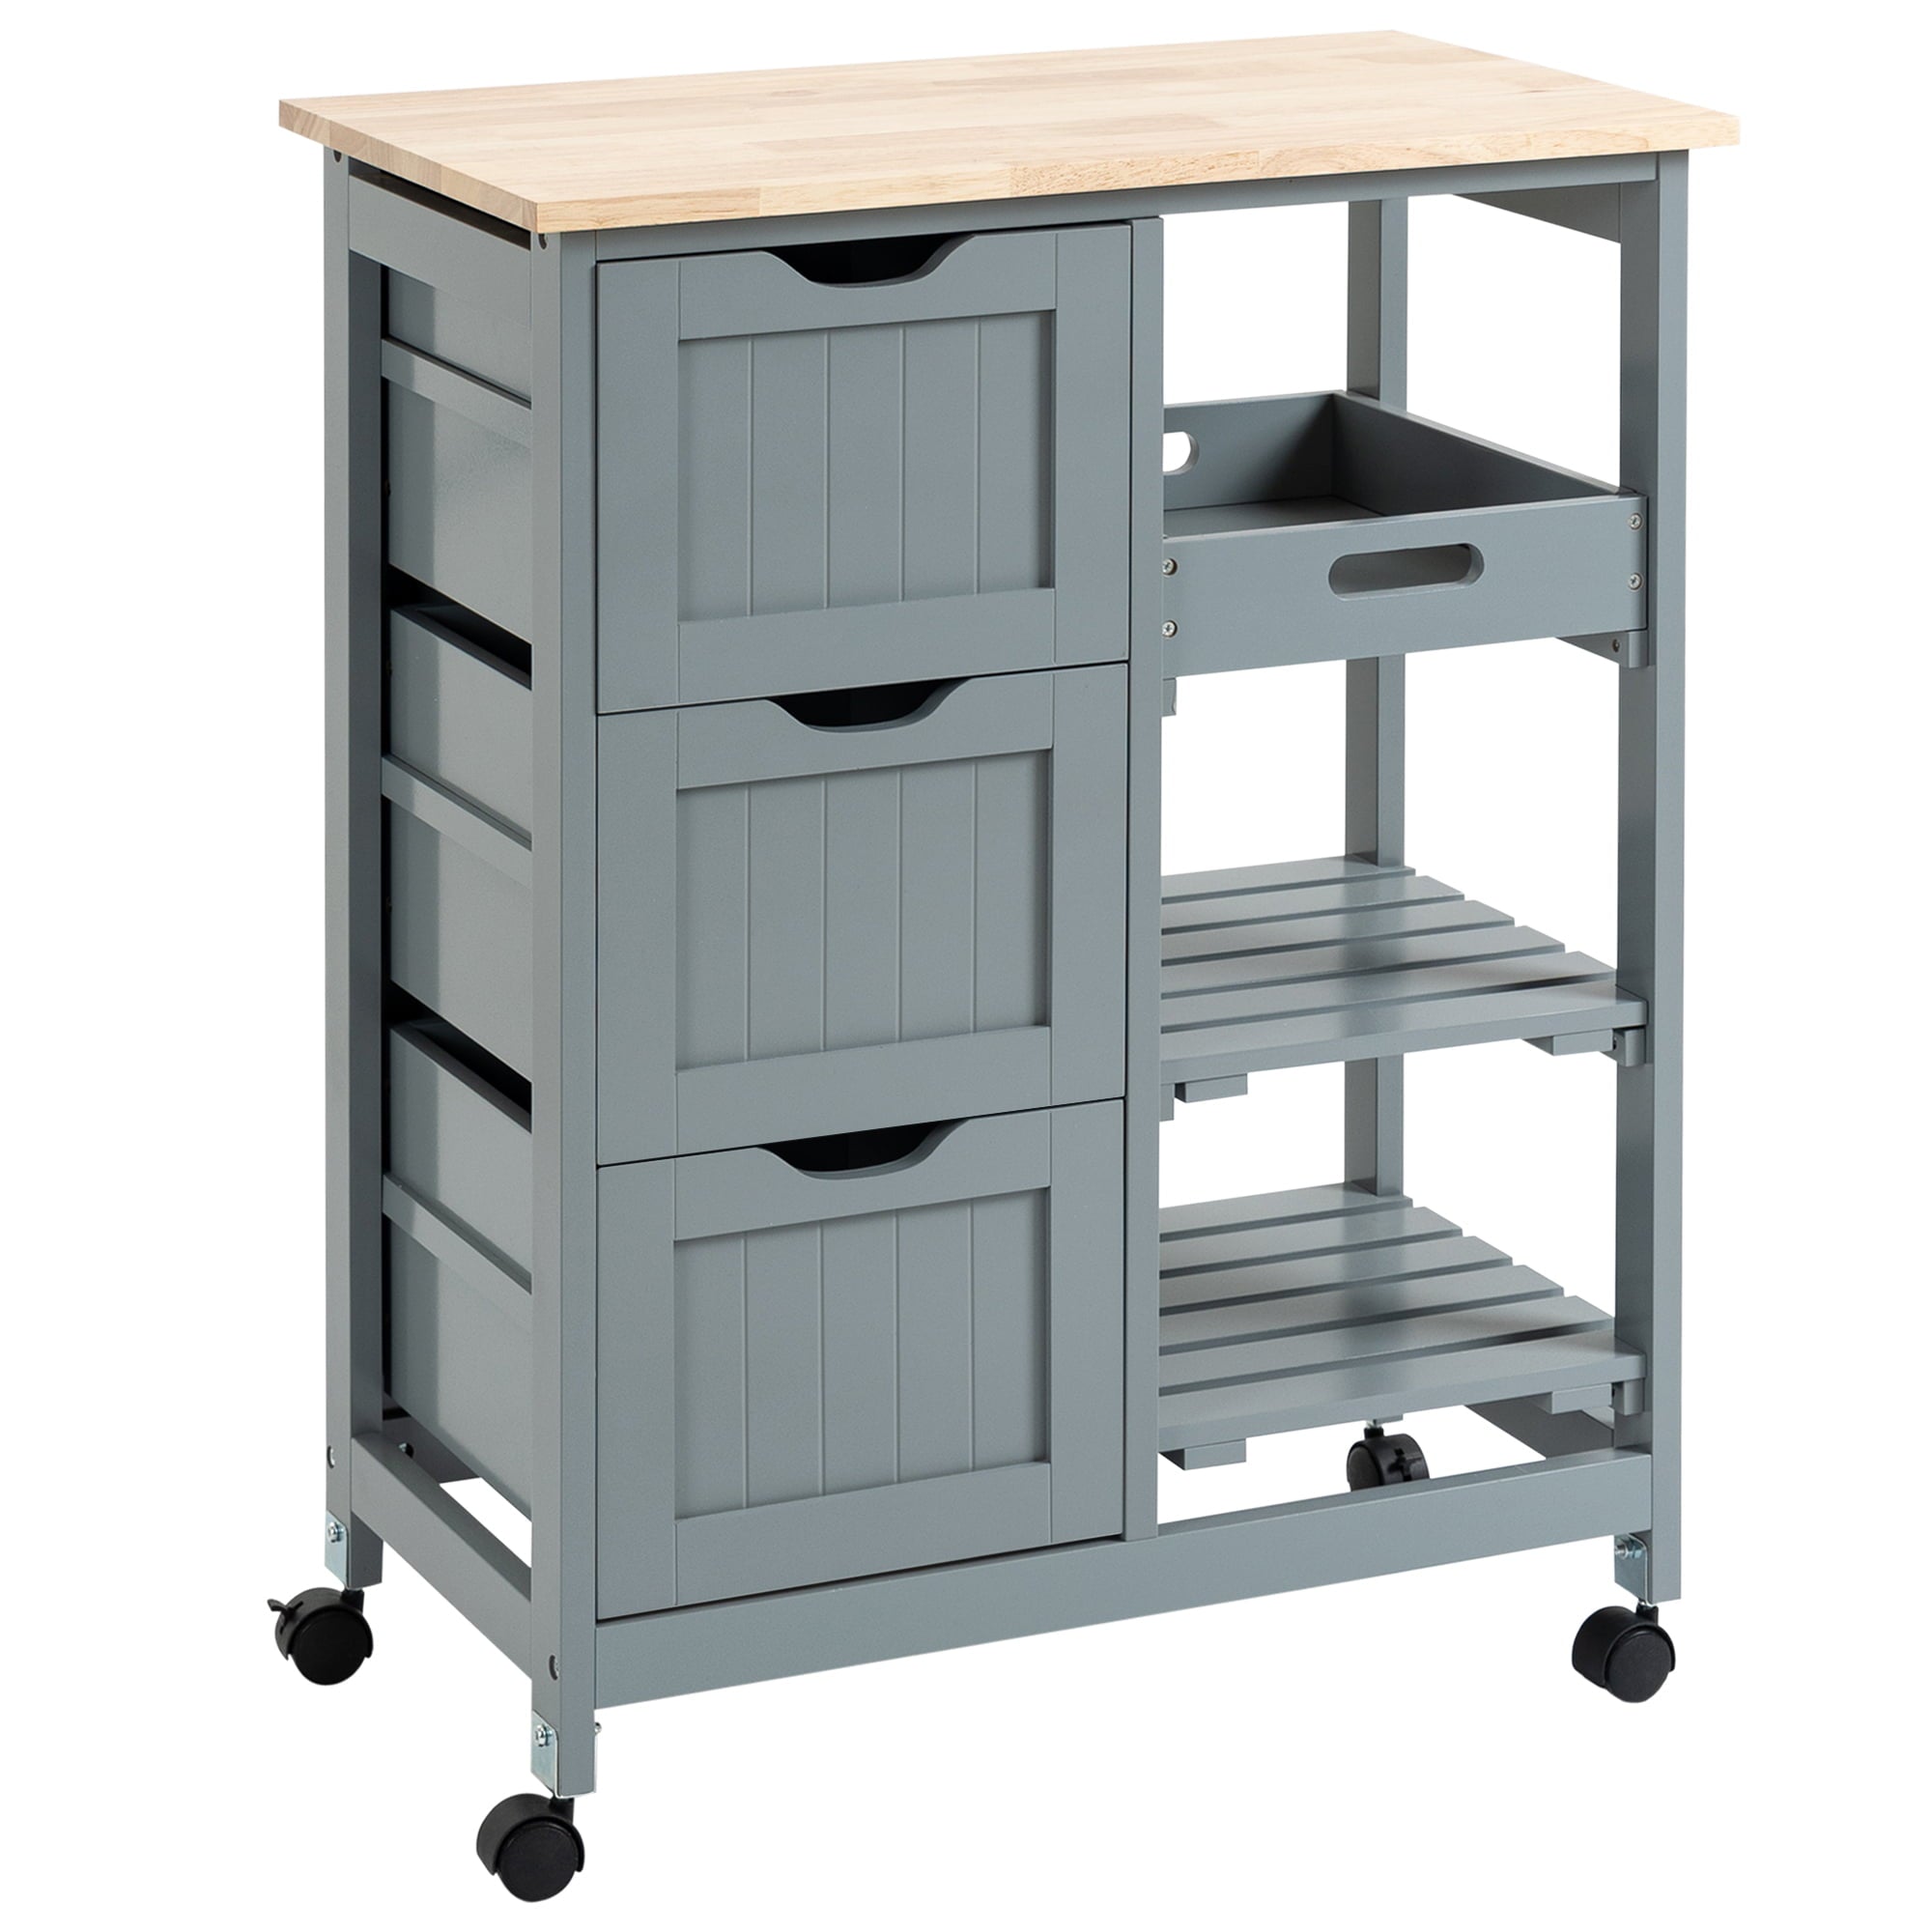 HomCom Rolling Kitchen Island Cart， Bar Serving Cart， Compact Trolley on Wheels with Wood Top， Shelves and Drawers for Home Dining Area， Gray